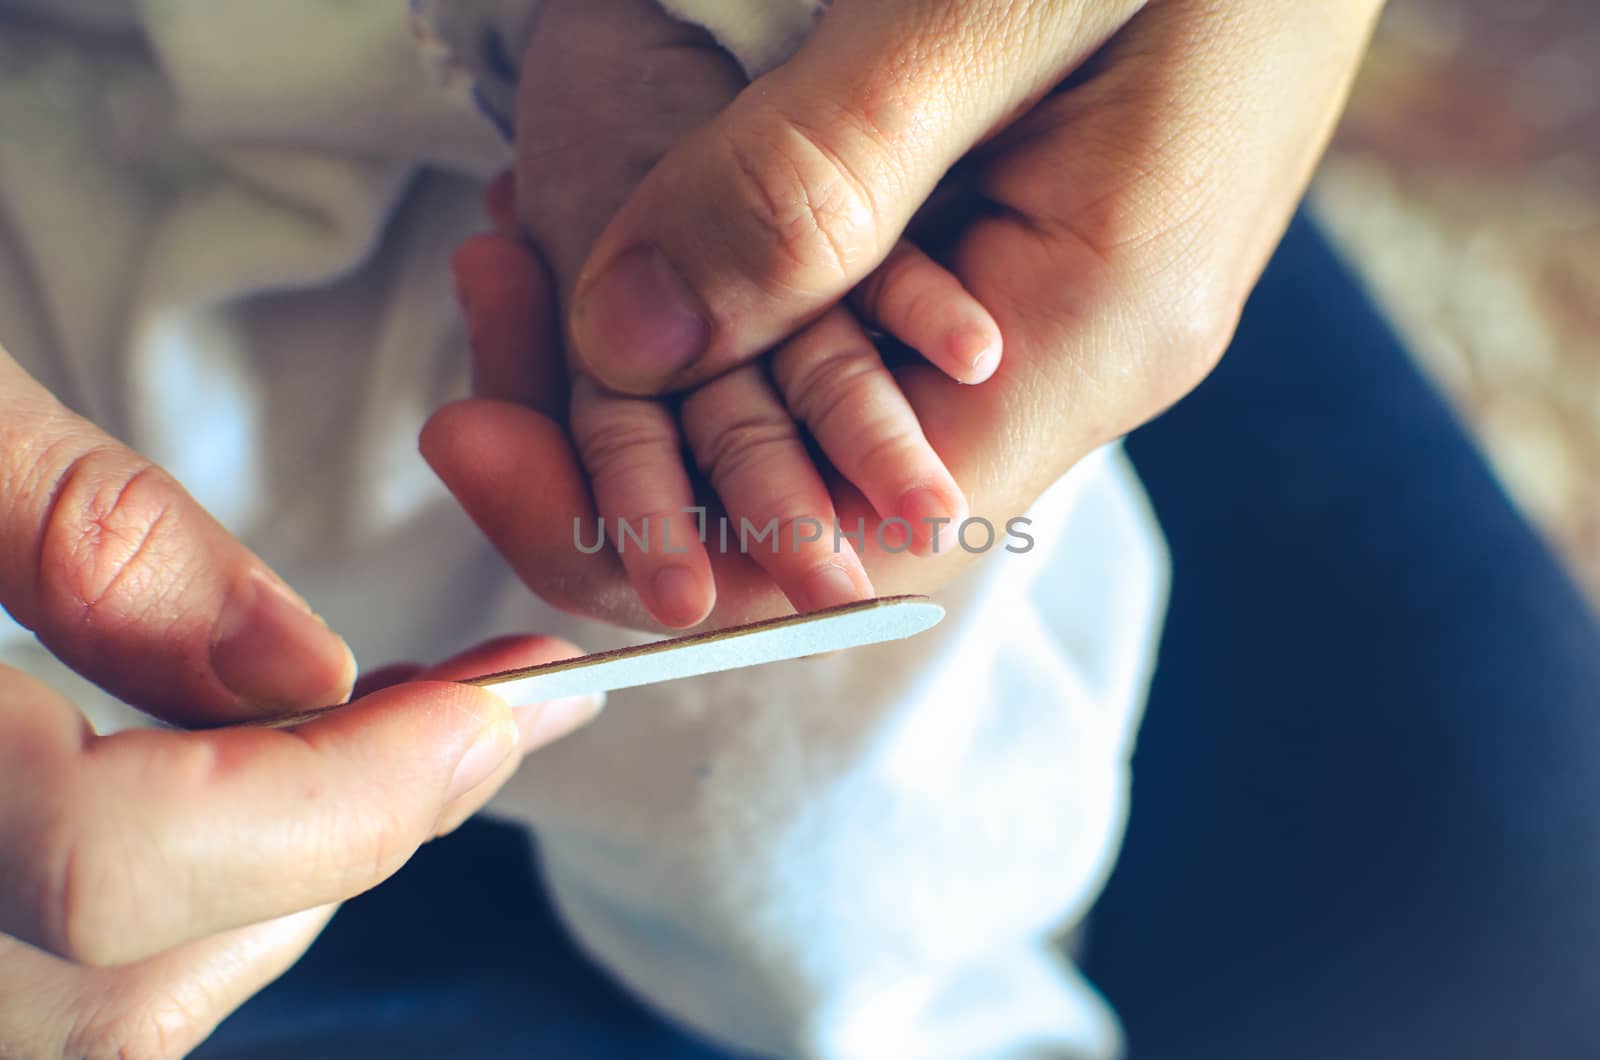 filing nails of newborn to avoid scratches - baby nail file cut